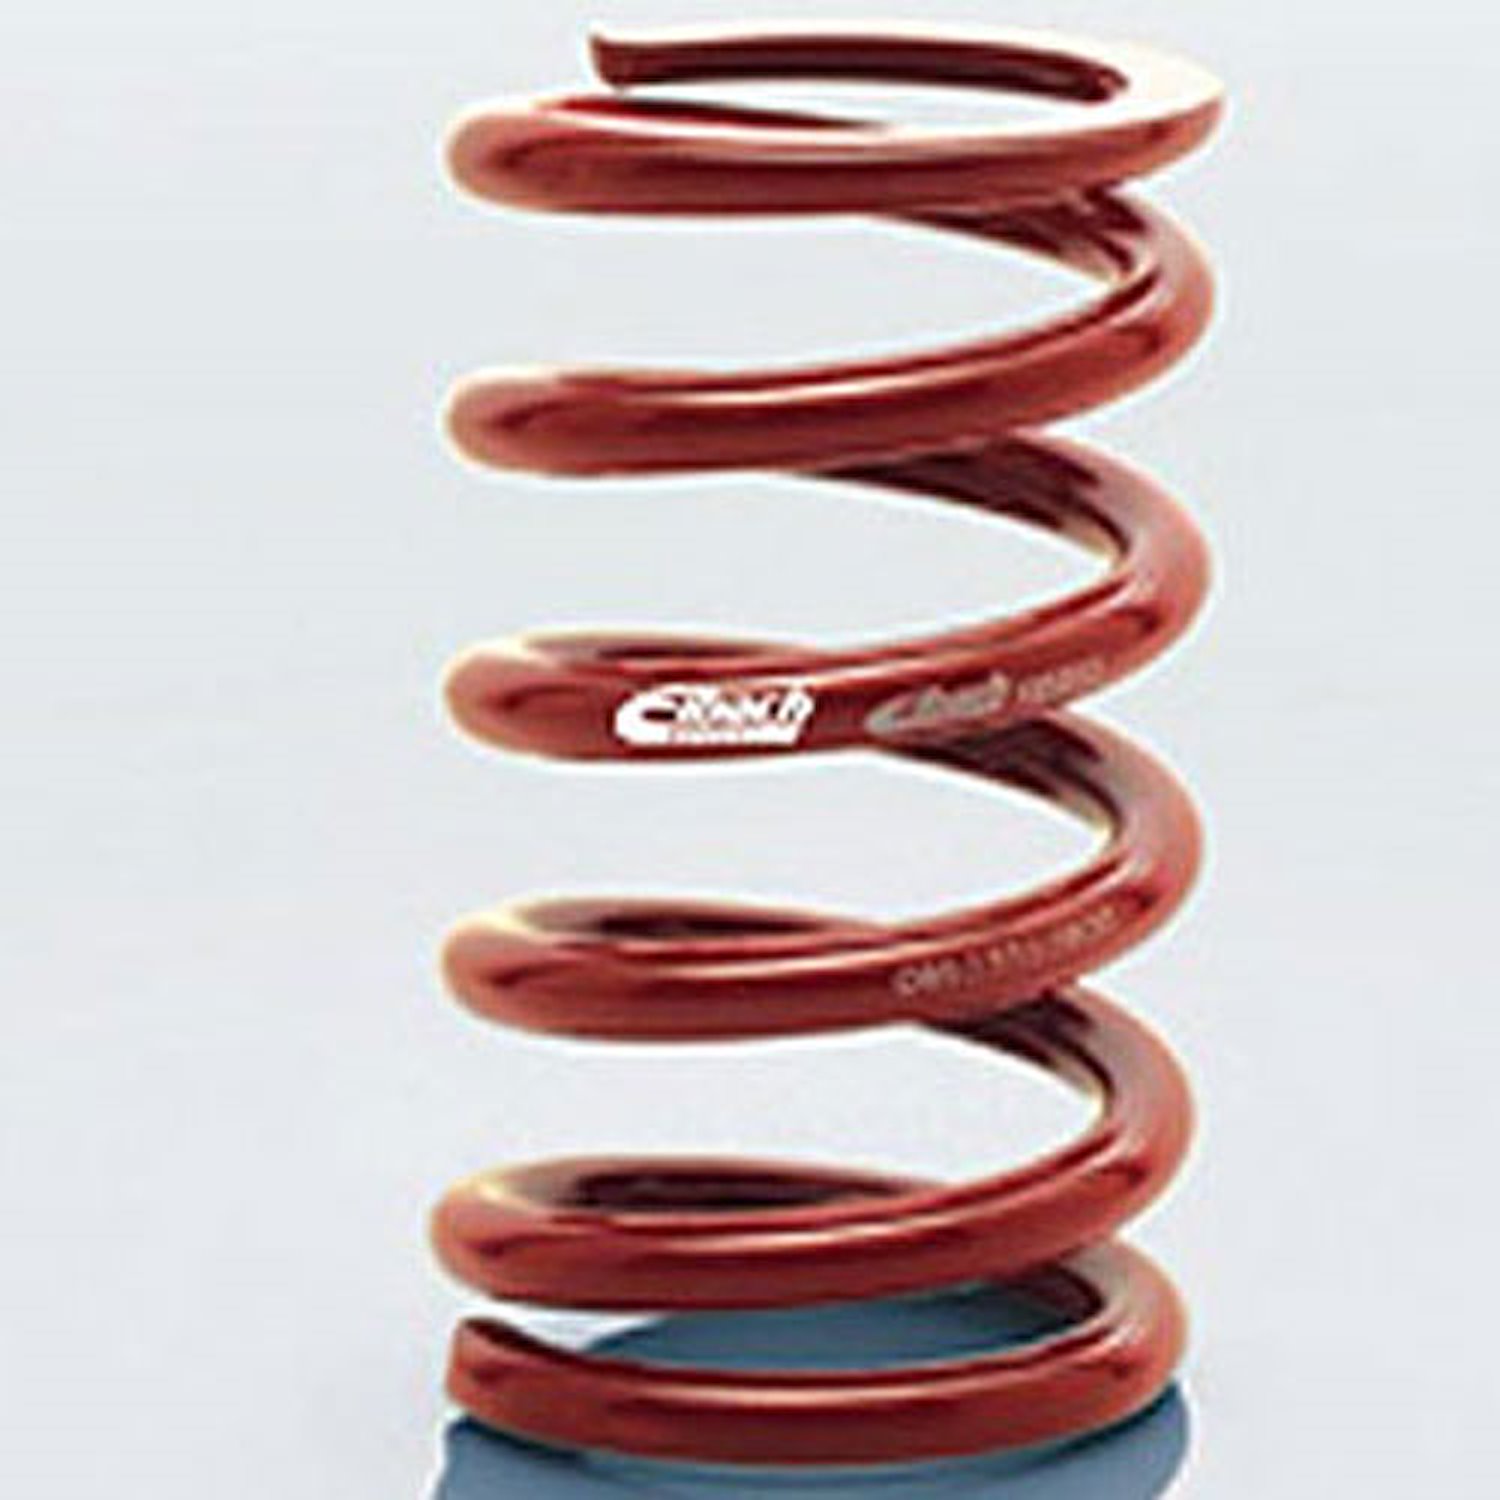 0950.550.0550 EIBACH CONVENTIONAL FRONT SPRING